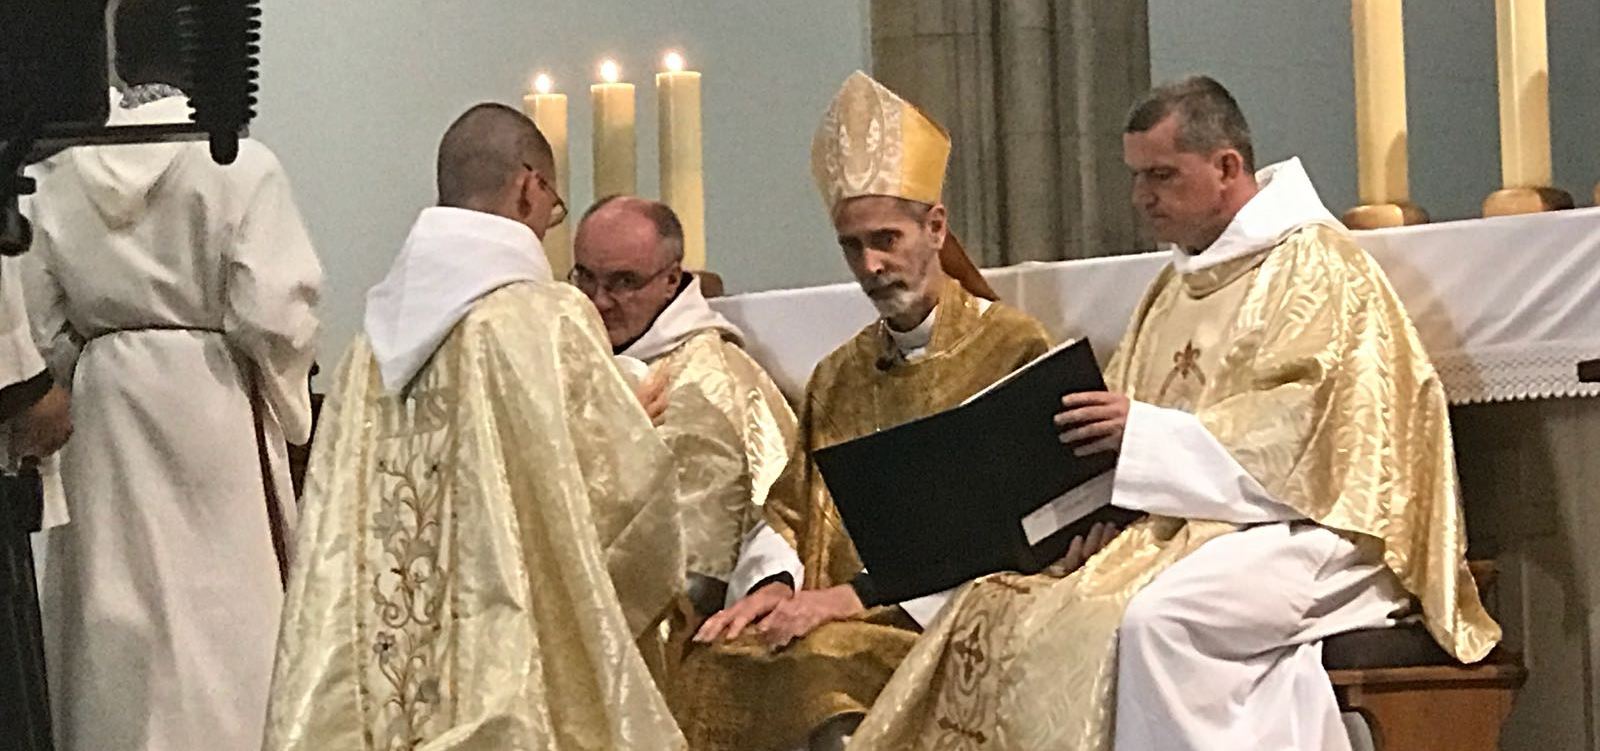 The Ordination of Br Philip Thomas - homily by Bishop Alan Williams